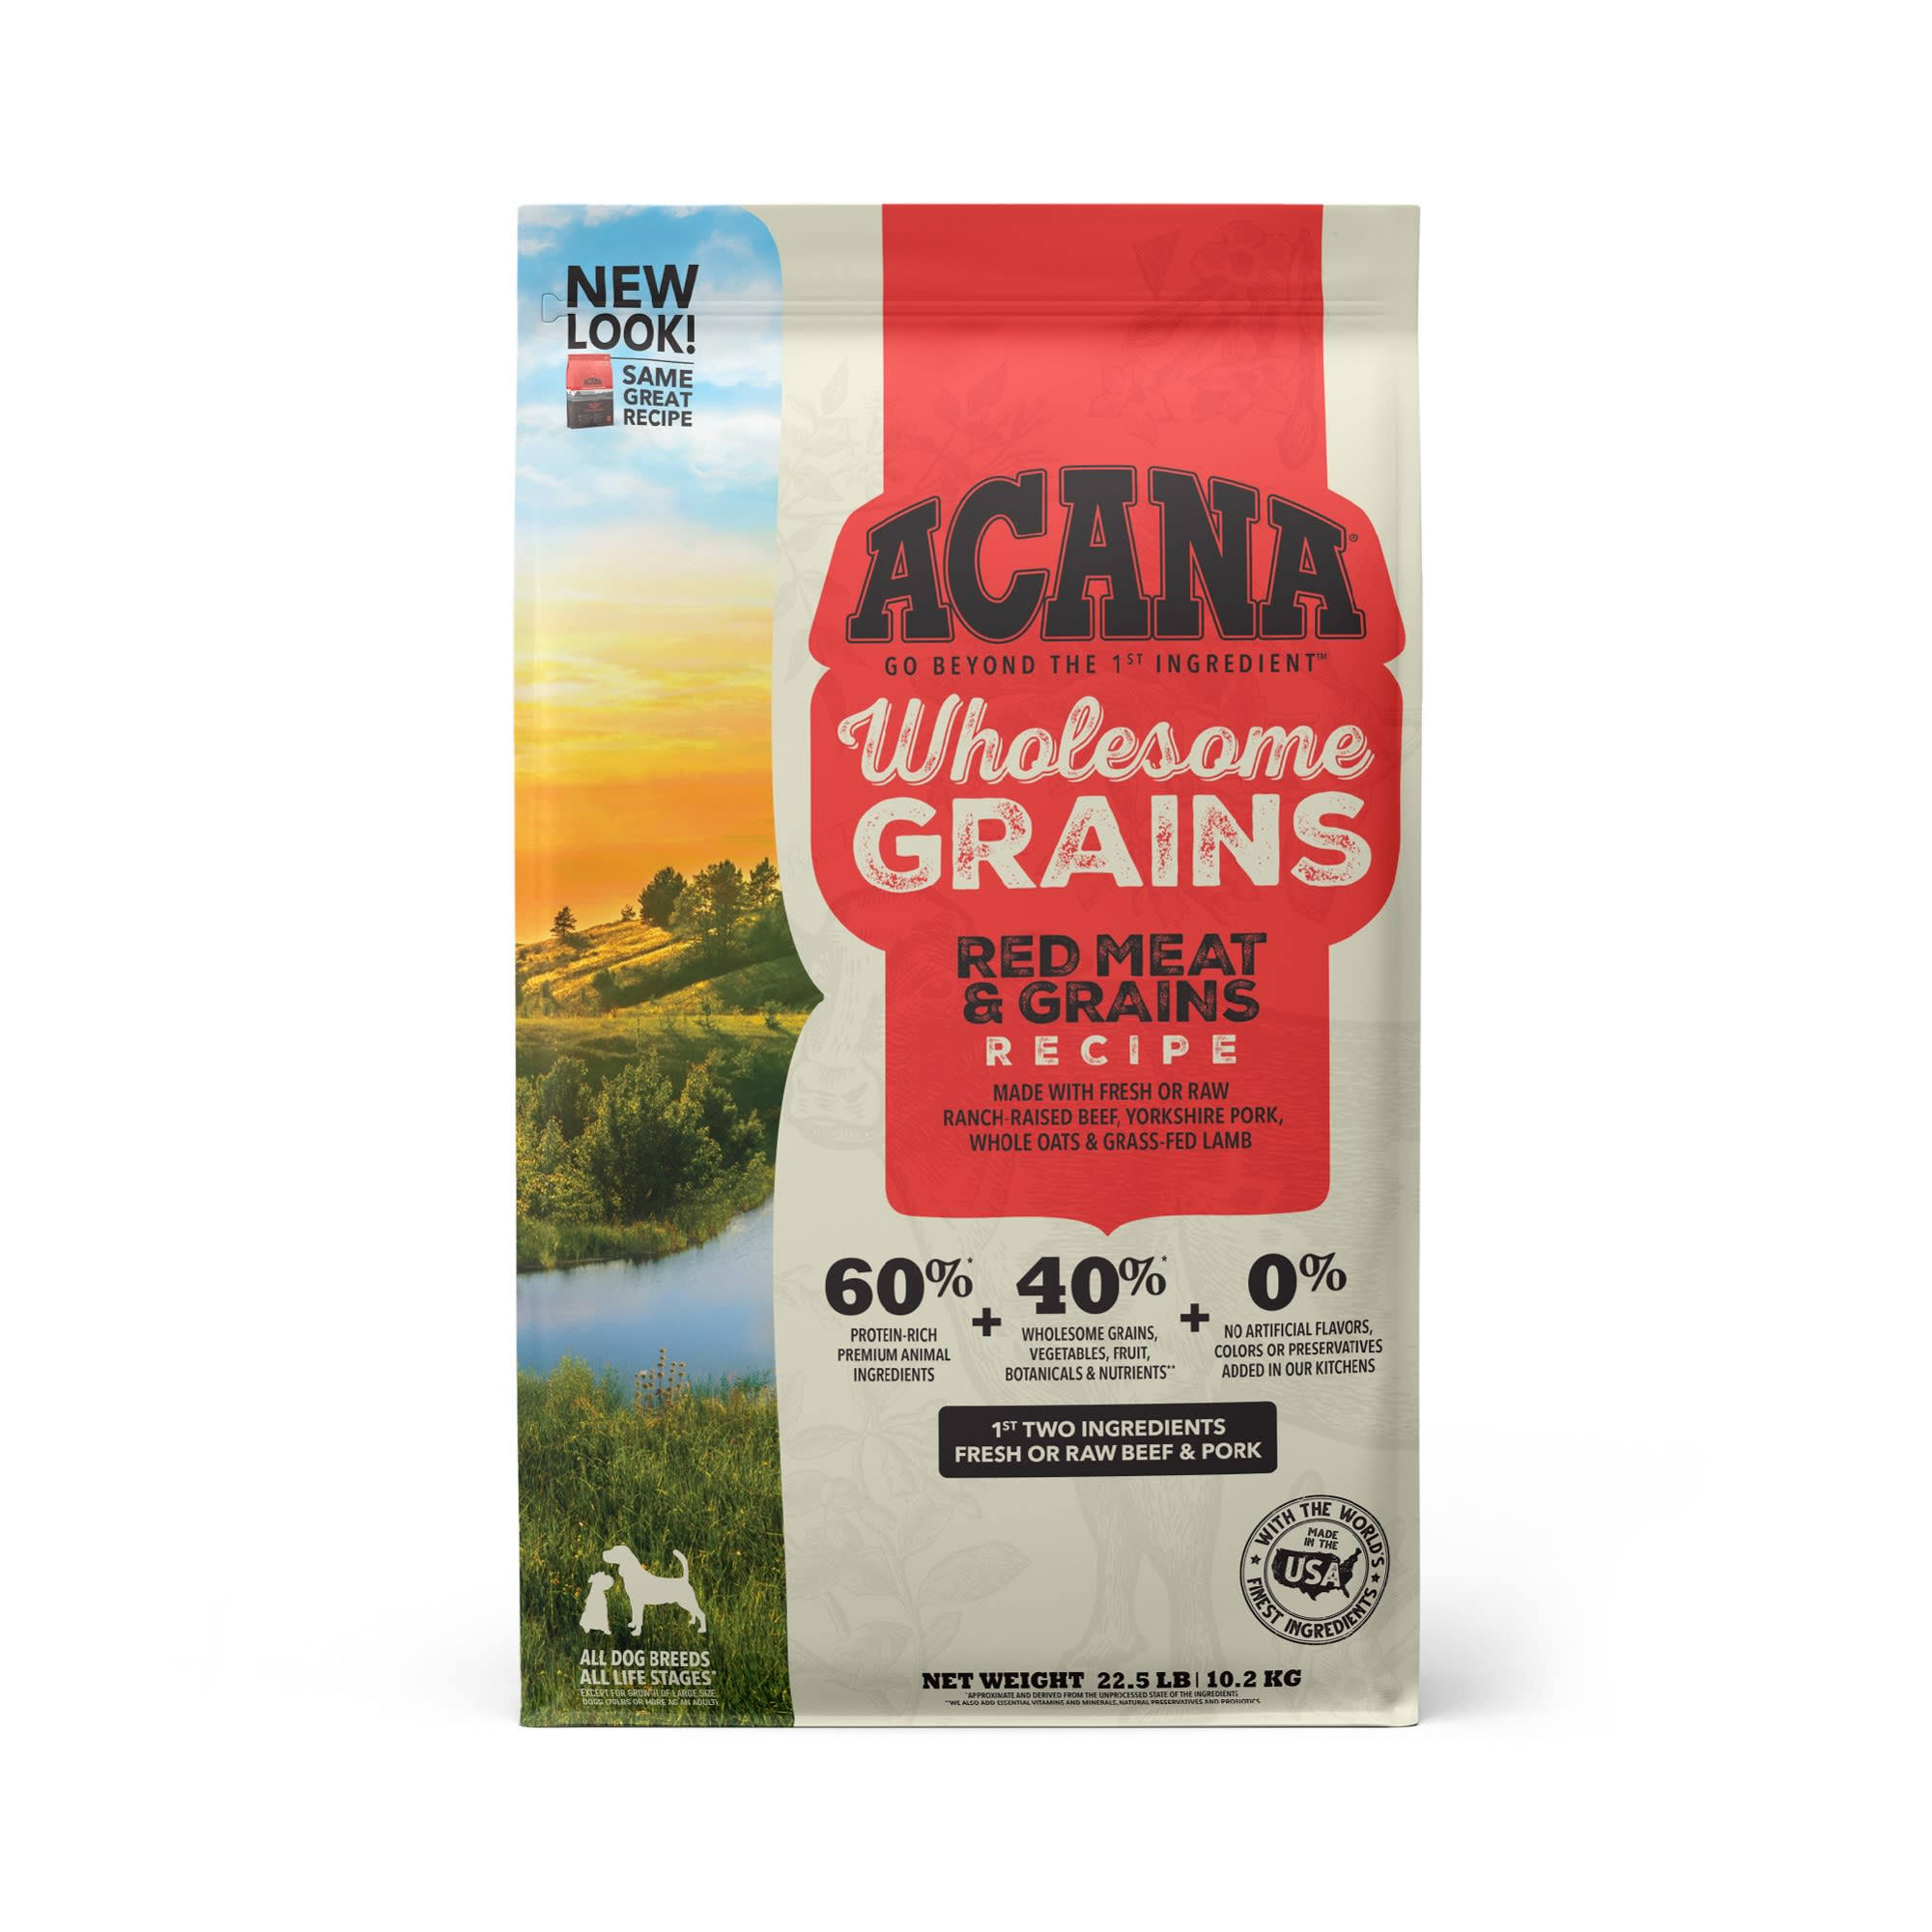 Acana Wholesome Grains Dry Dog Food, Red Meat and Grains, Beef, Pork, and Lamb, Gluten Free, 225lb